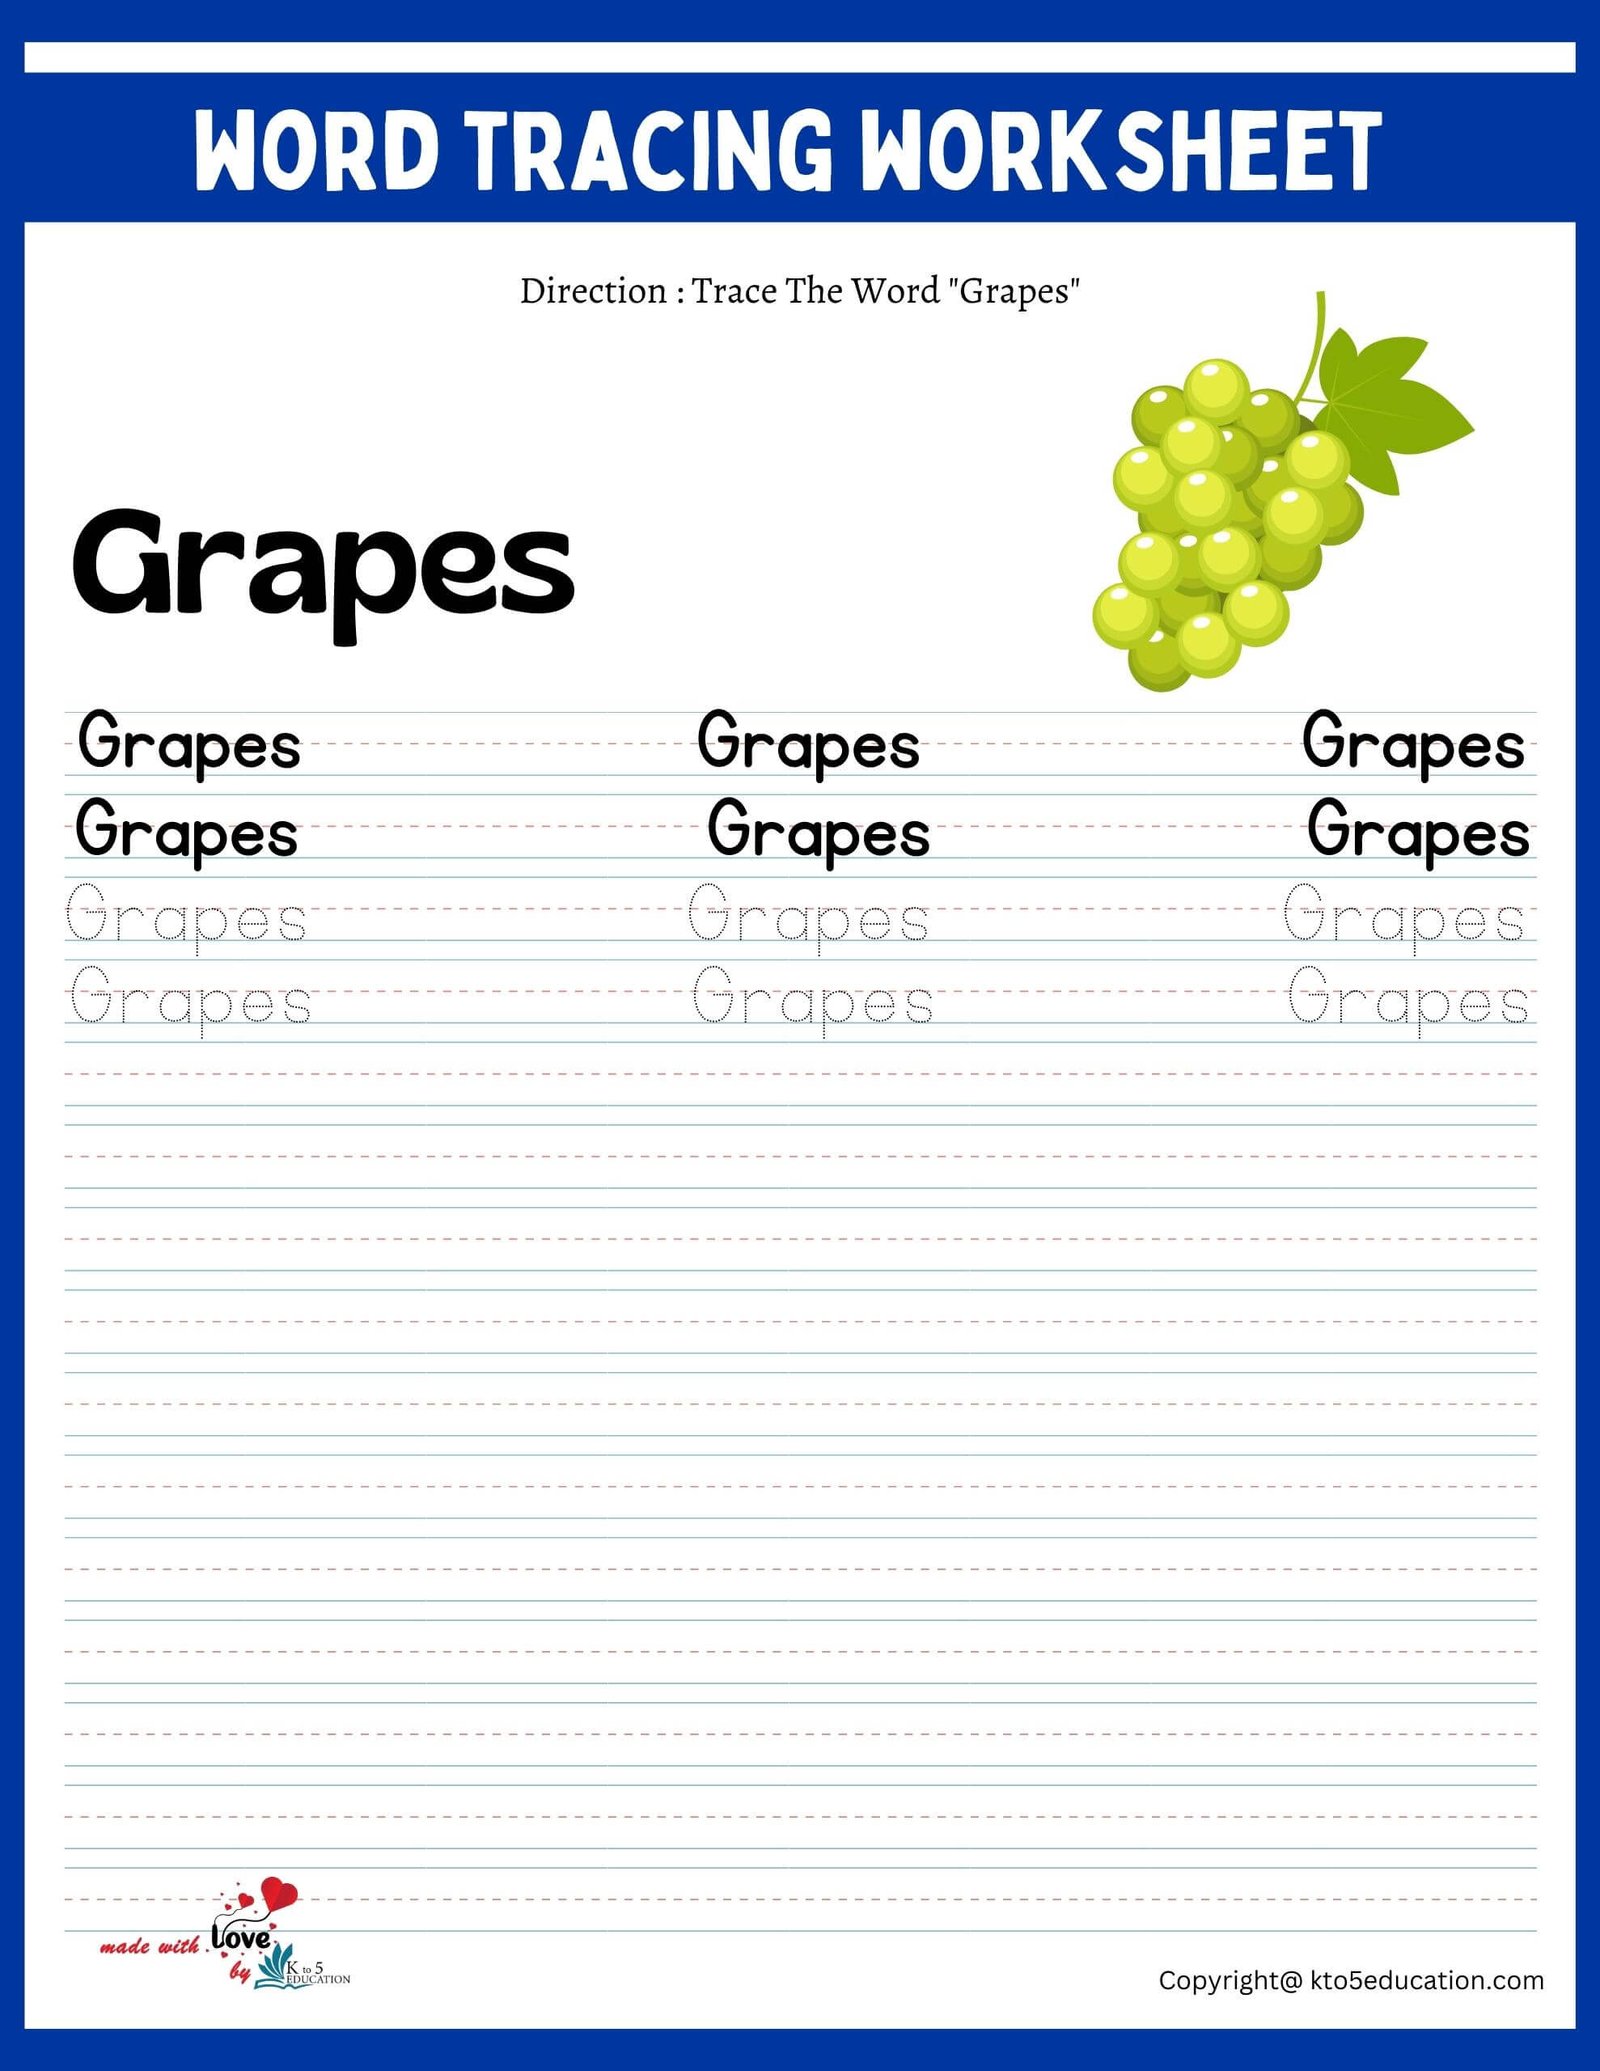 Trace The Word Grapes Worksheet